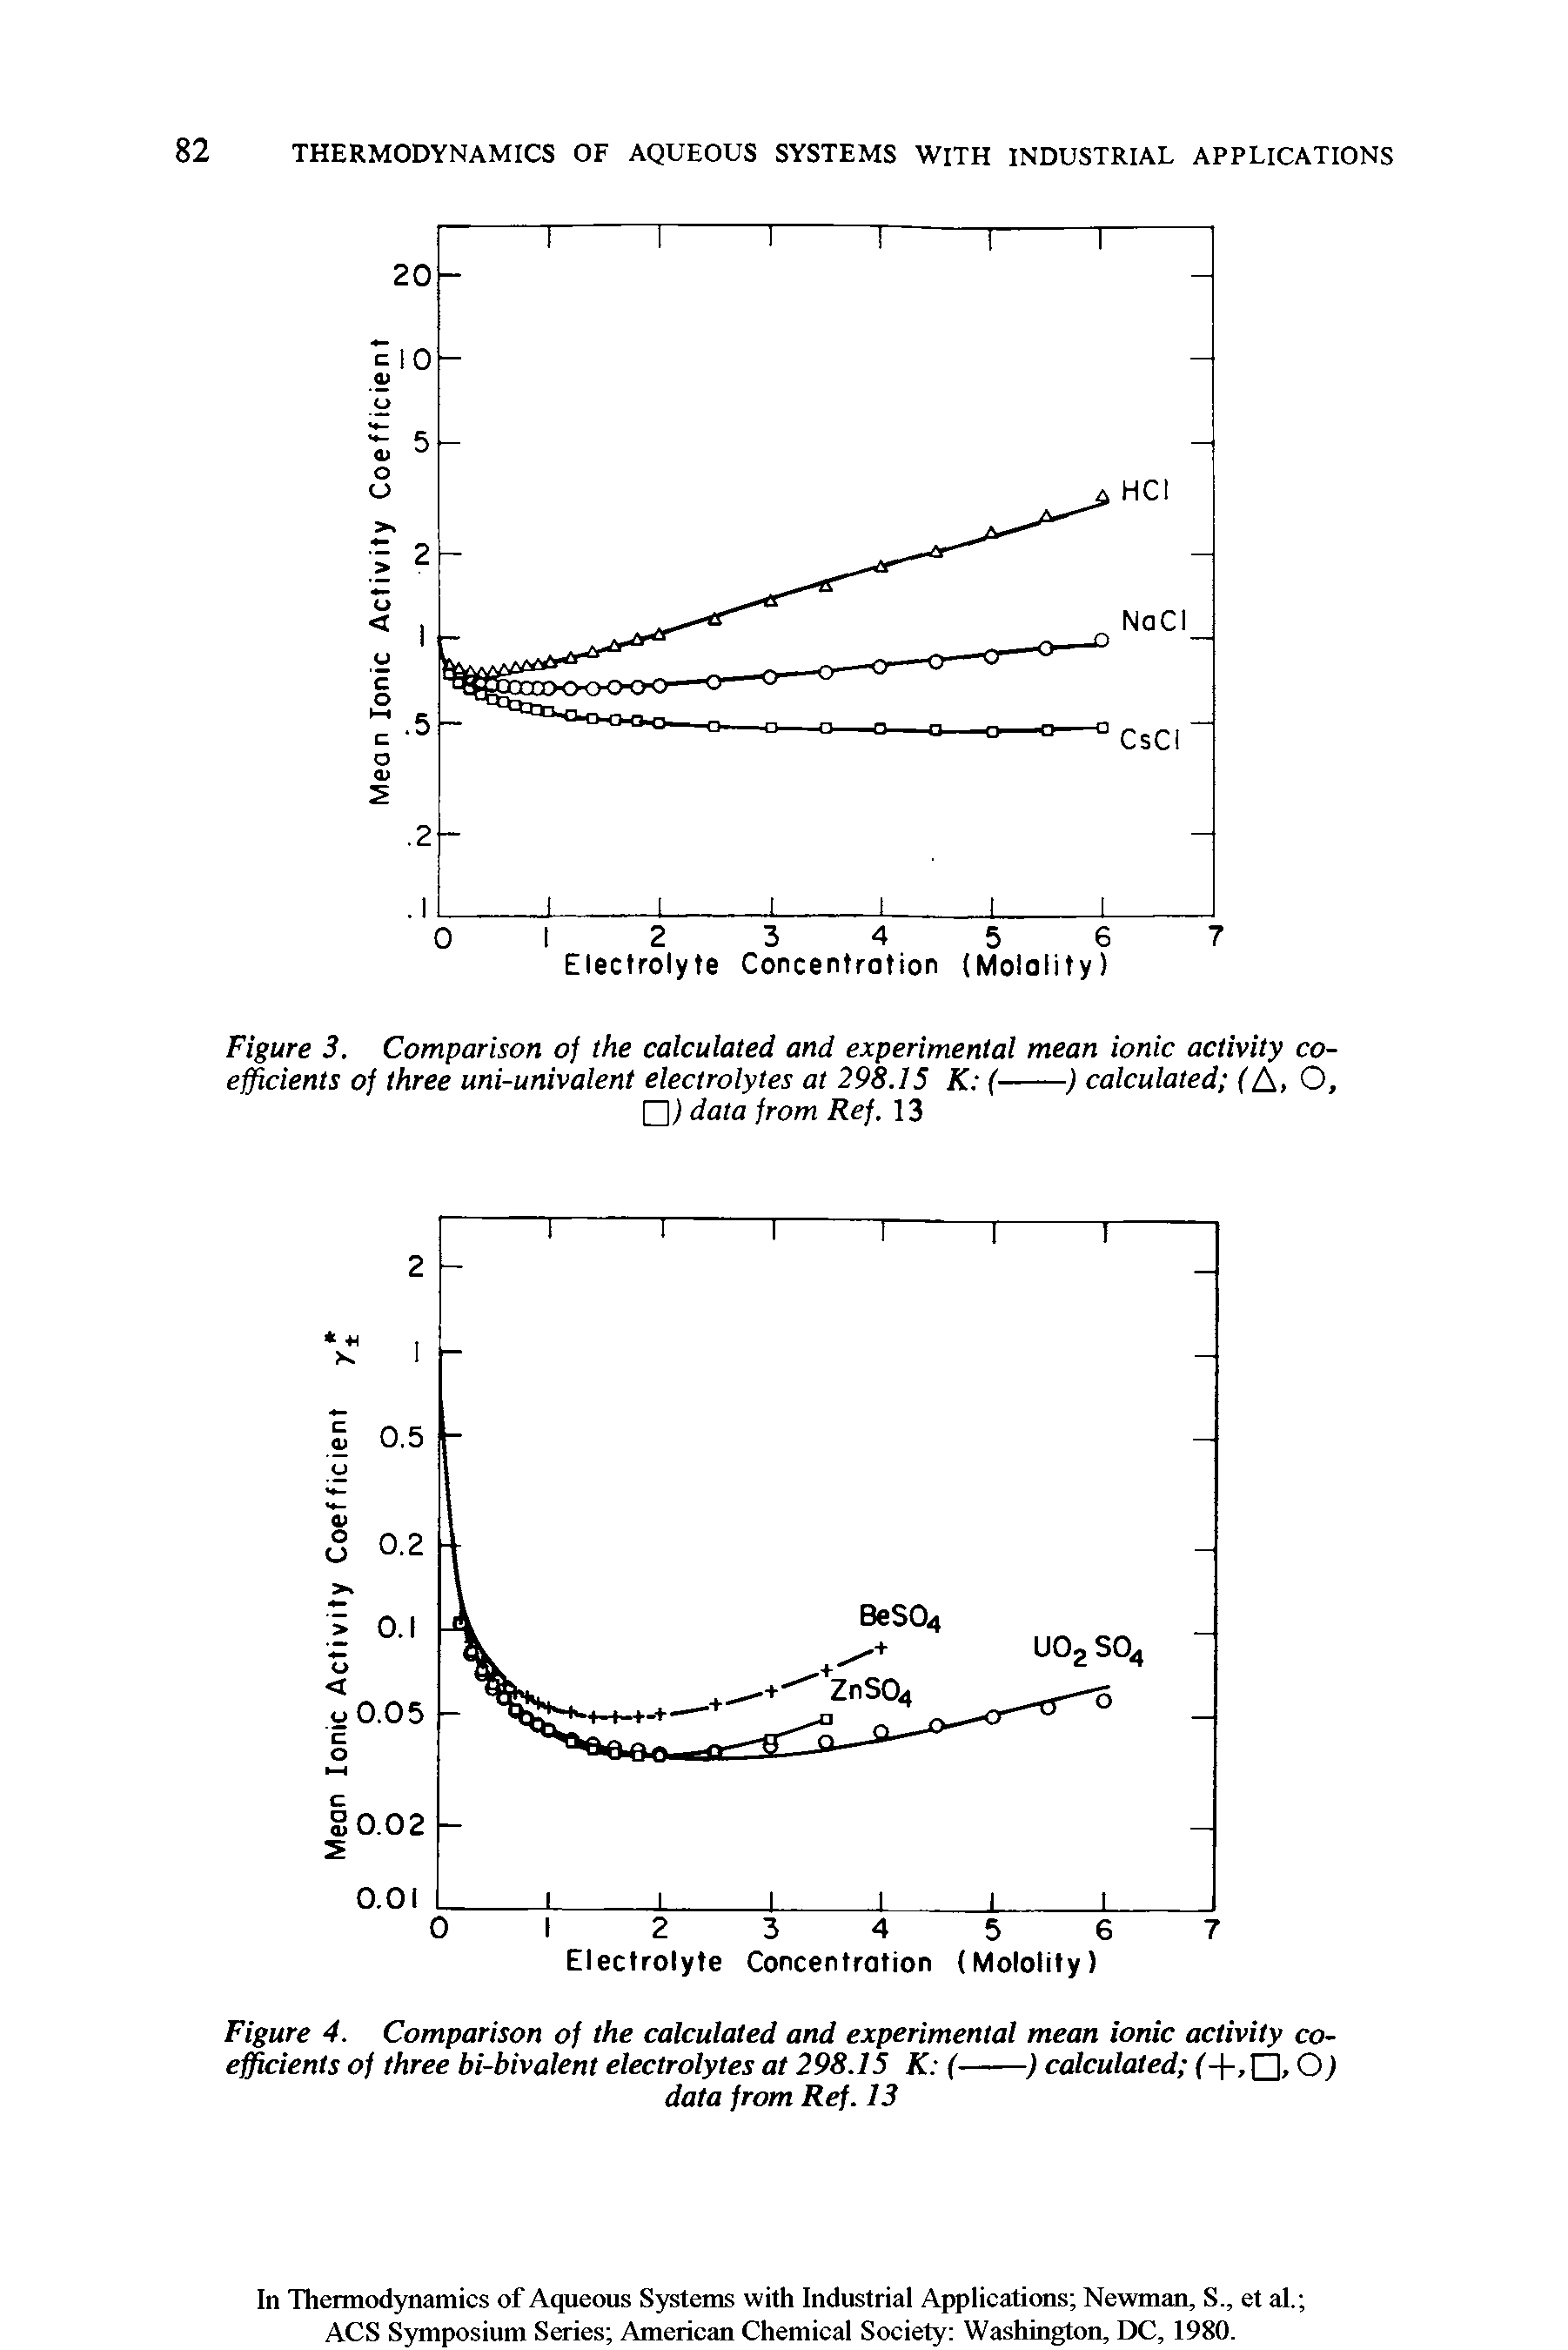 Figure 3. Comparison of the calculated and experimental mean ionic activity coefficients of three uni-univalent electrolytes at 298.15 K (-) calculated (A, O,...